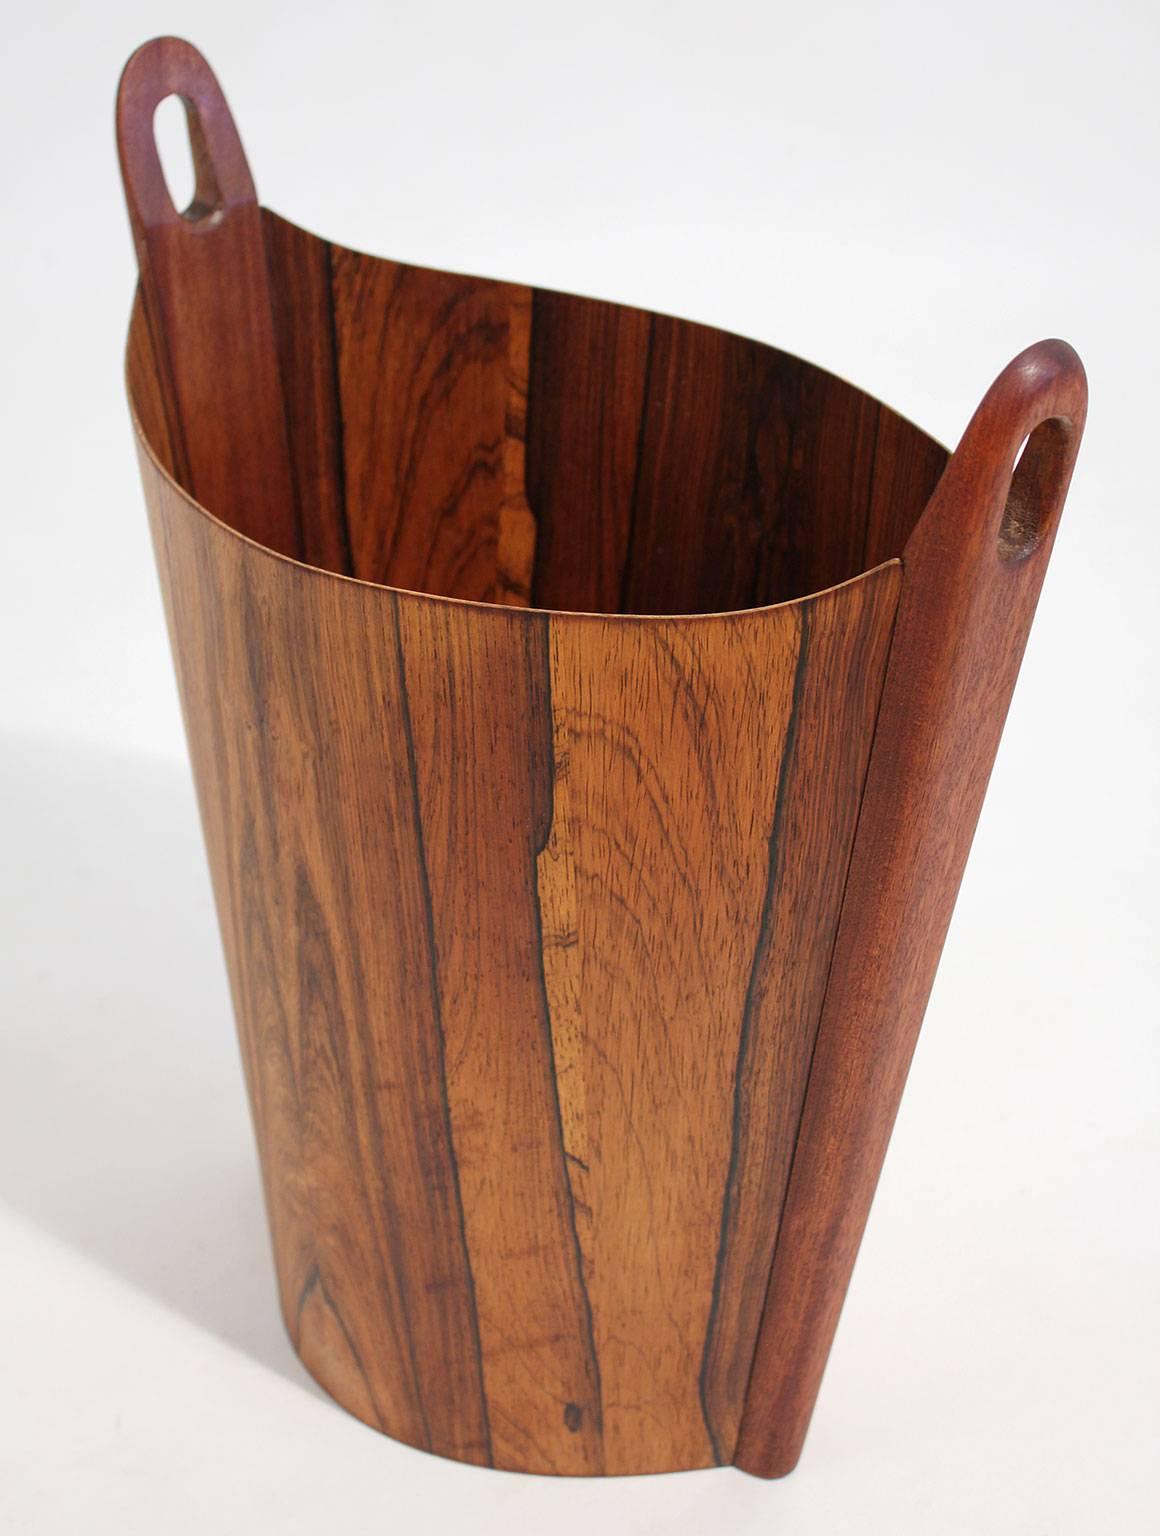 Modernist rosewood wastebasket designed by Einar Barnes for P.S. Heggen, circa 1960s. Made in Norway and is marked by the designer. In excellent vintage condition with no issues to mention. Rosewood has beautiful natural color and grain. Great